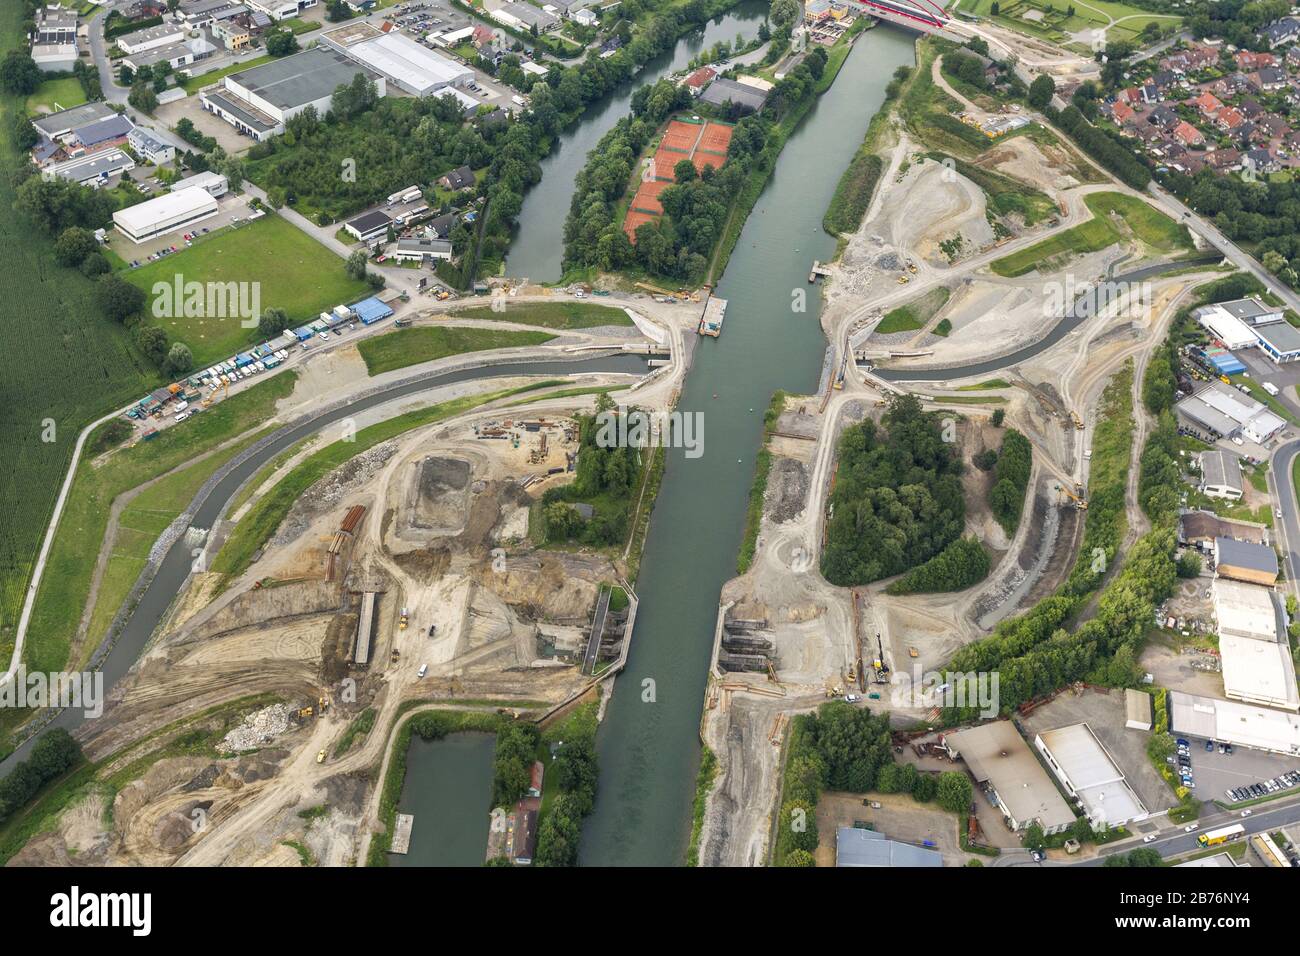 Emscher passing under the Rhein-Herne canal in Castrop-Rauxel, 12.03.2012, aerial view, Germany, North Rhine-Westphalia, Ruhr Area, Castrop-Rauxel Stock Photo